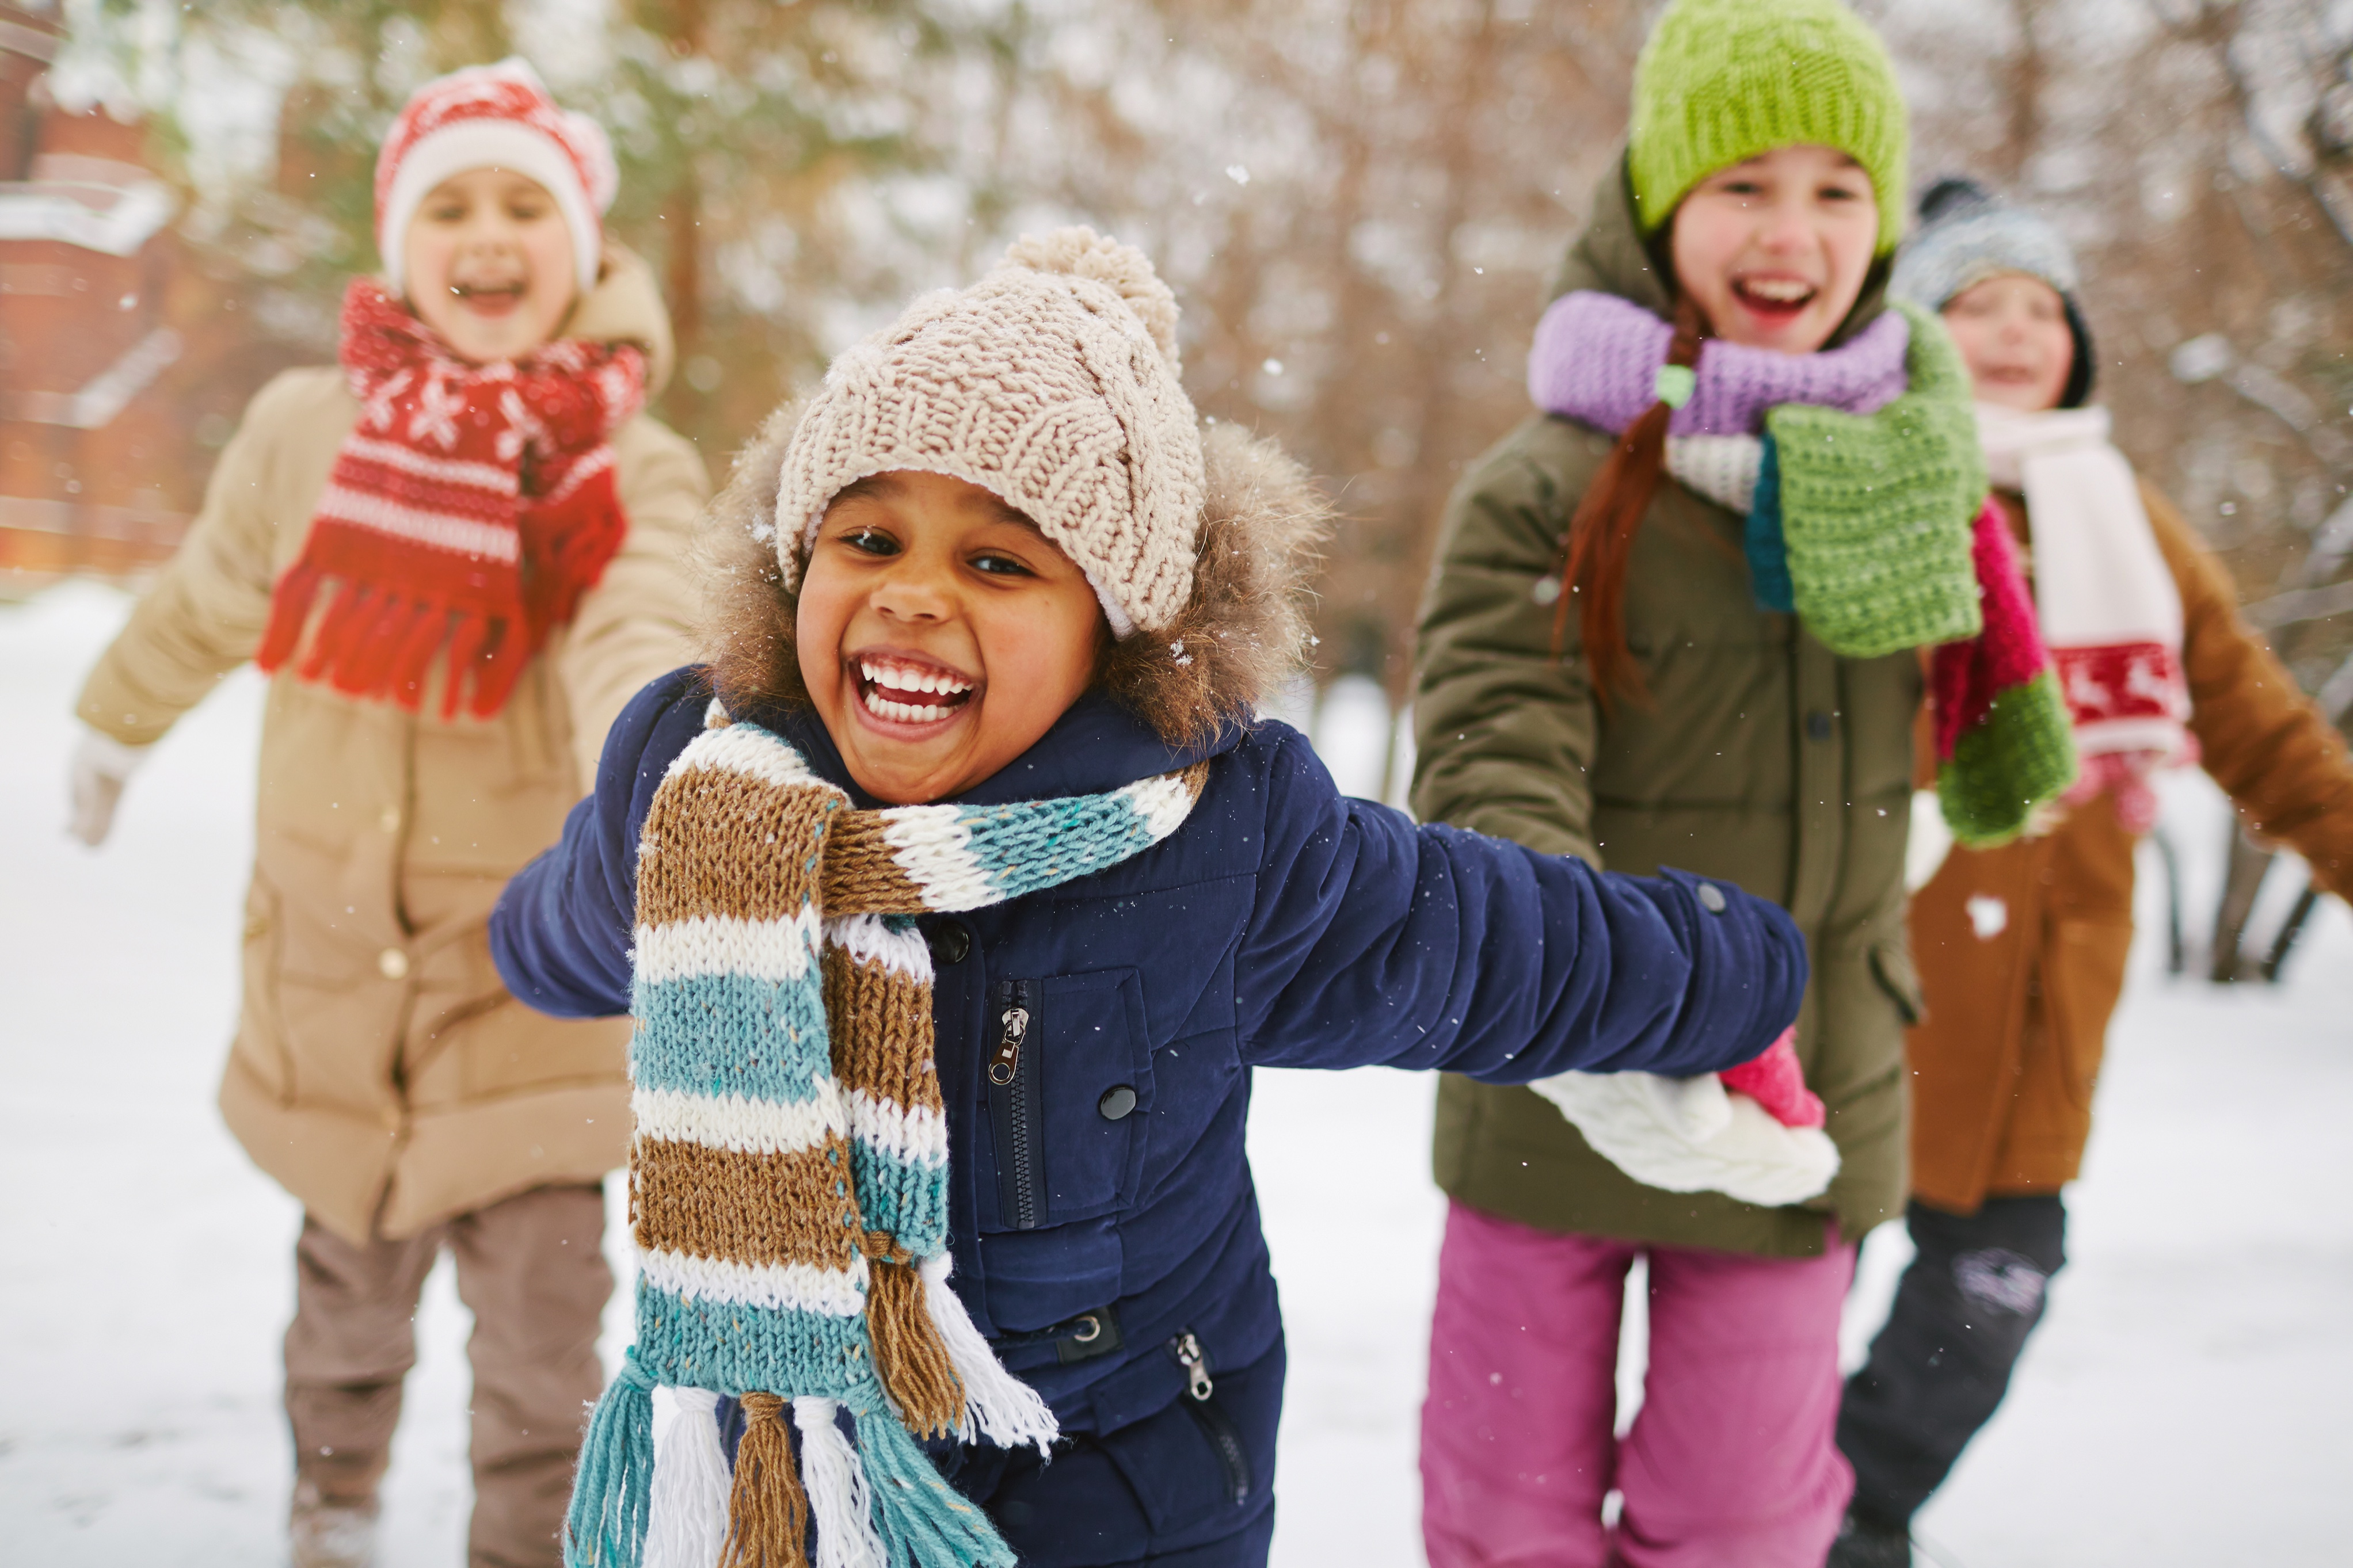 A group of children playing together in snow